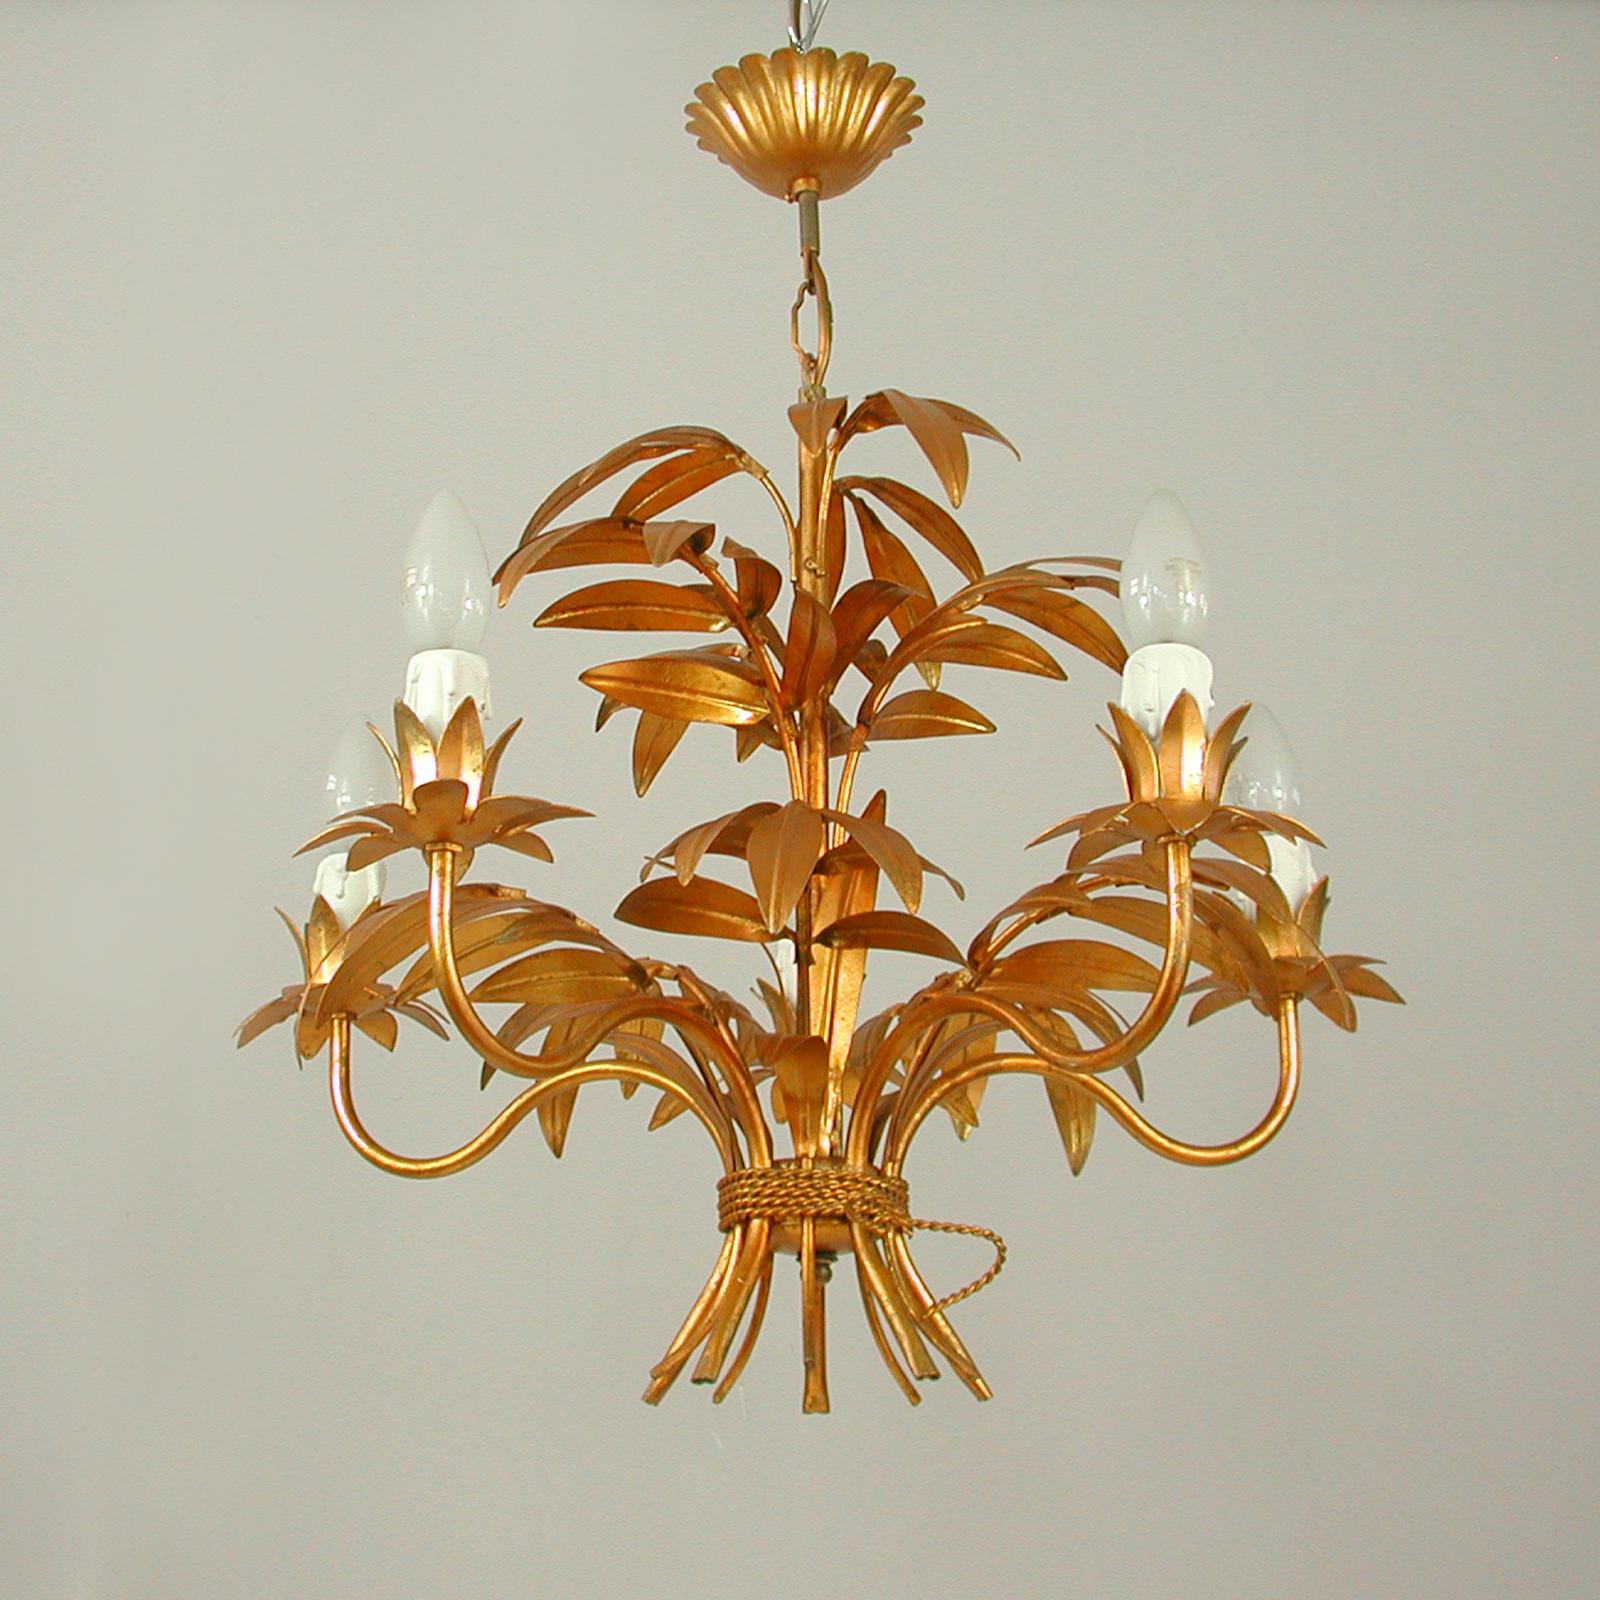 This beautiful gilt chandelier was designed and manufactured in Germany in the 1970s by Hans Kögl Leuchten. It features 5 lights and is made of antique gold-plated metal. 

Kögls designs were inspired by natural shapes such as sheaf of wheat or